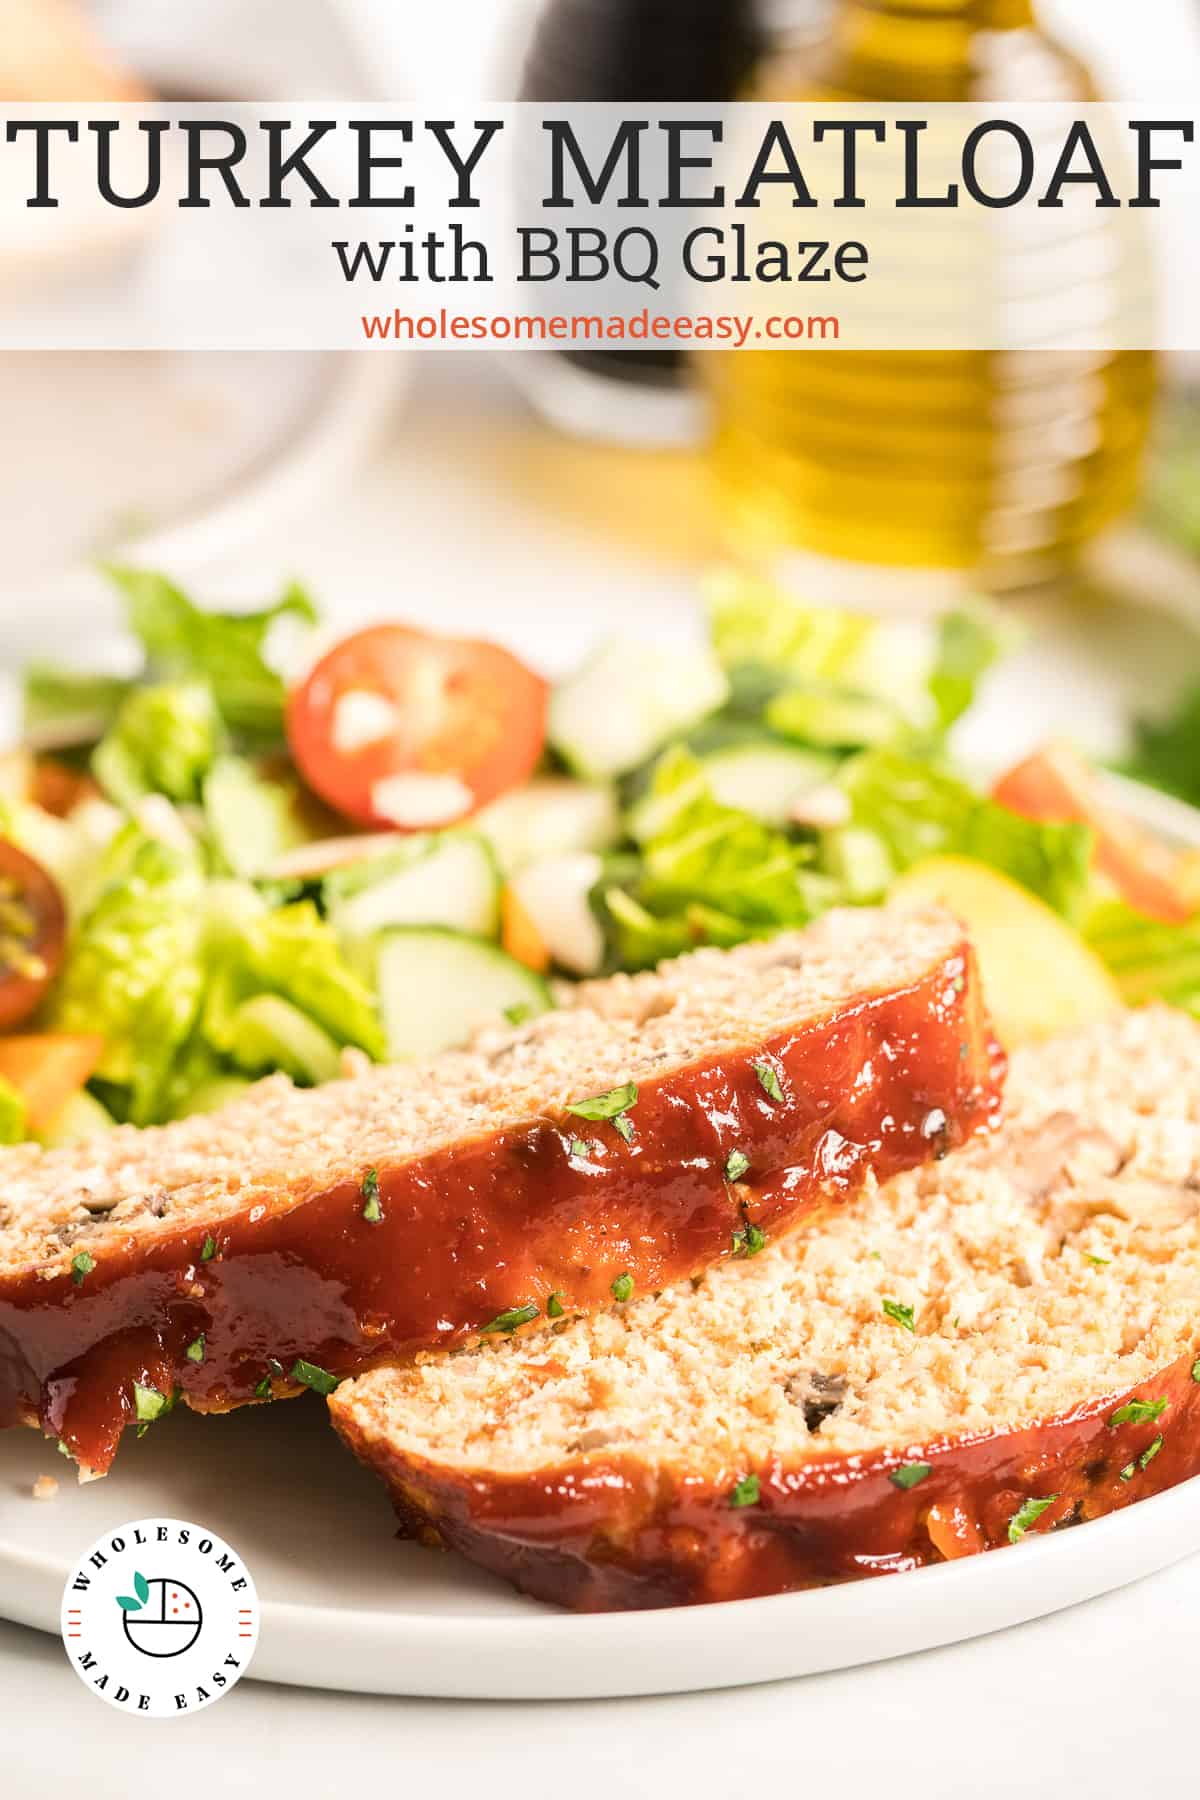 Two slices of turkey meatloaf on a white plate with salad with text overlay.